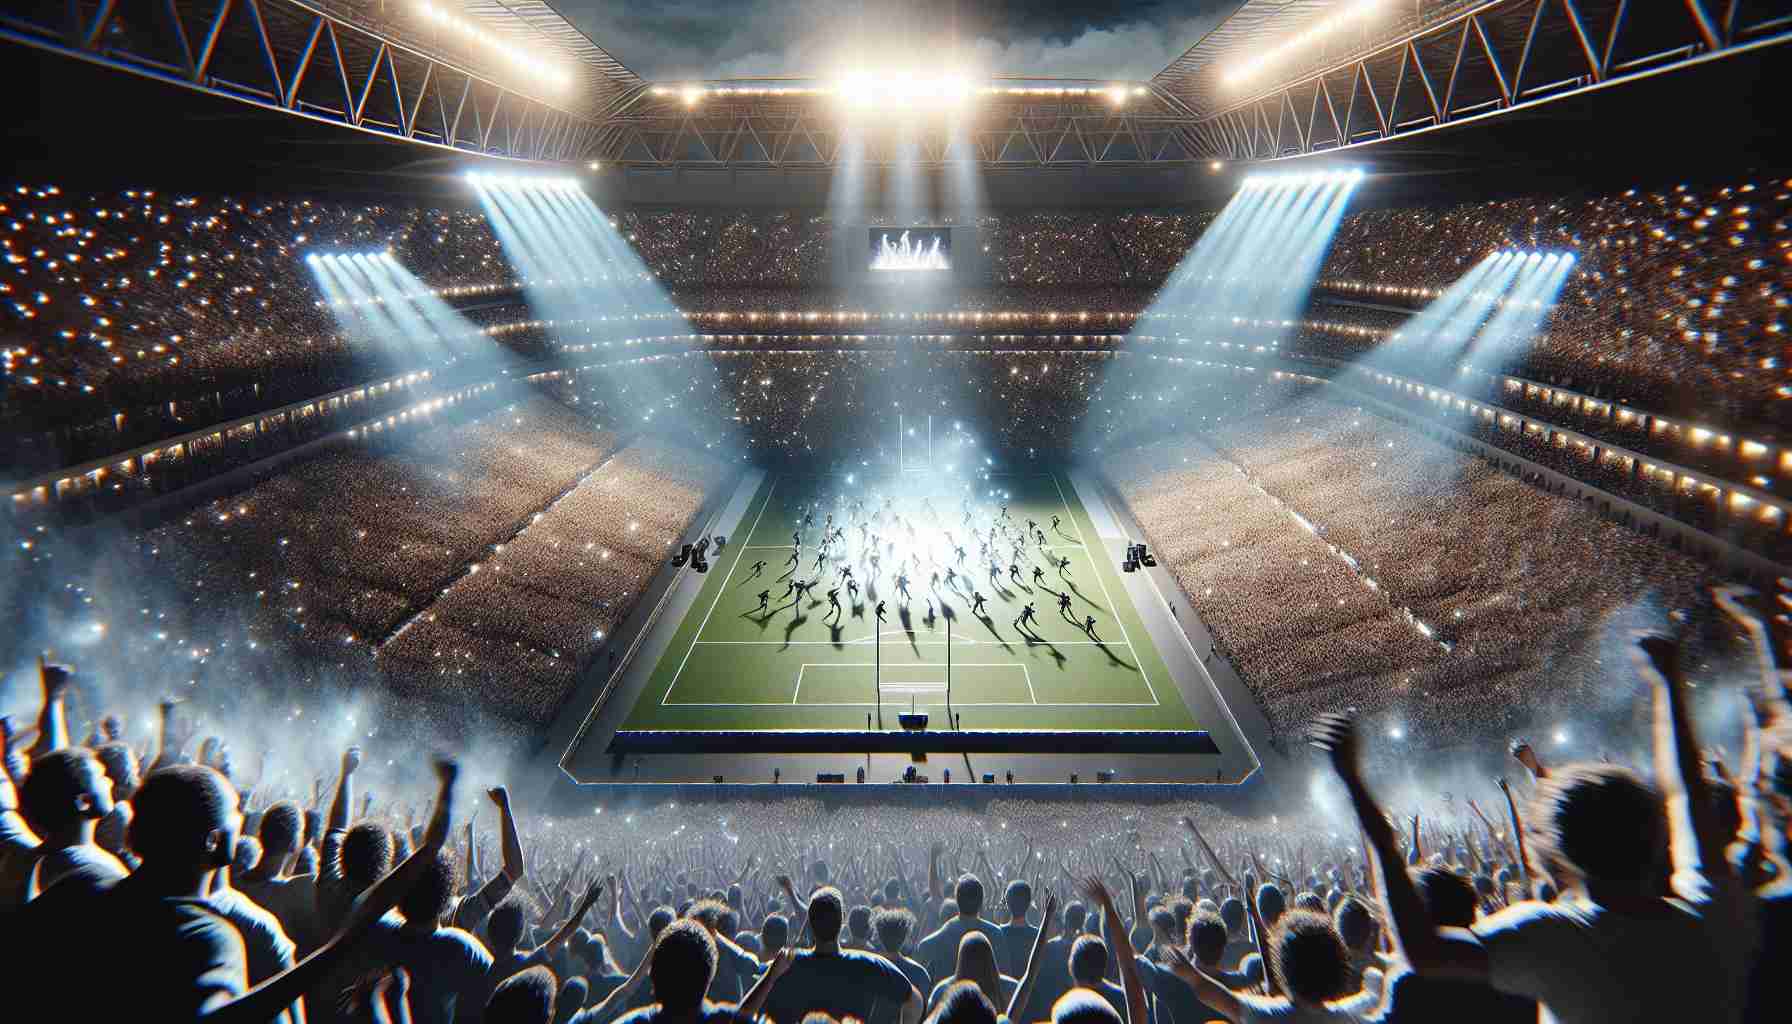 A realistic, high-definition rendering of an iconic performance at a massive, well-known stadium, packed with eager spectators. Floating in the air is the tangible excitement of an unforgettable game or concert, while the field below is filled with talented performers giving their all. The bright stadium lights illuminate the scene, creating an intense and emotional atmosphere. You can almost hear the roar of the crowd and feel the vibration of their cheers in the grandstands.